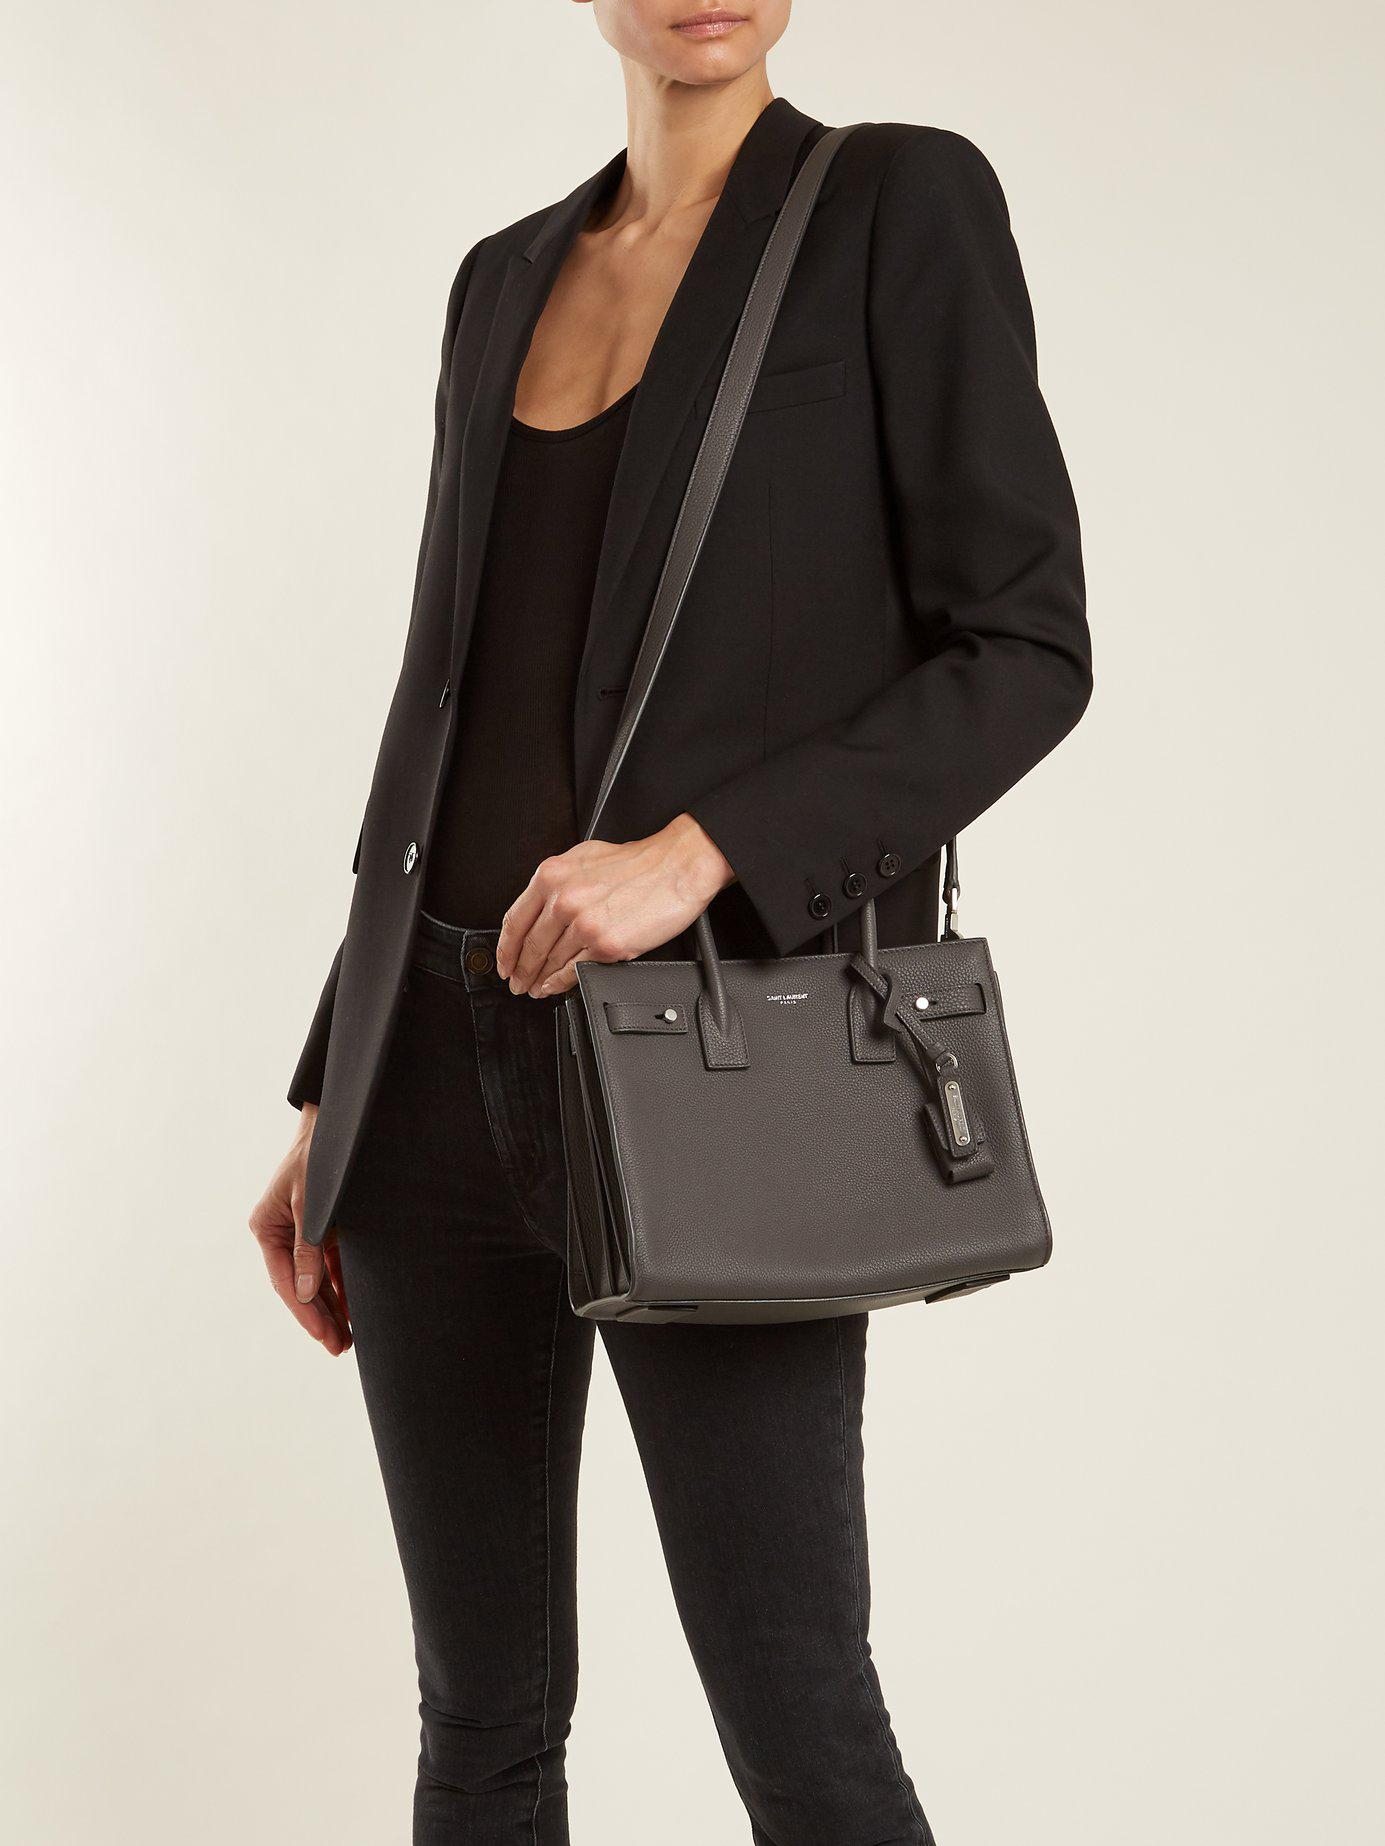 Saint Laurent Sac De Jour Baby Grained-leather Tote in Gray | Lyst